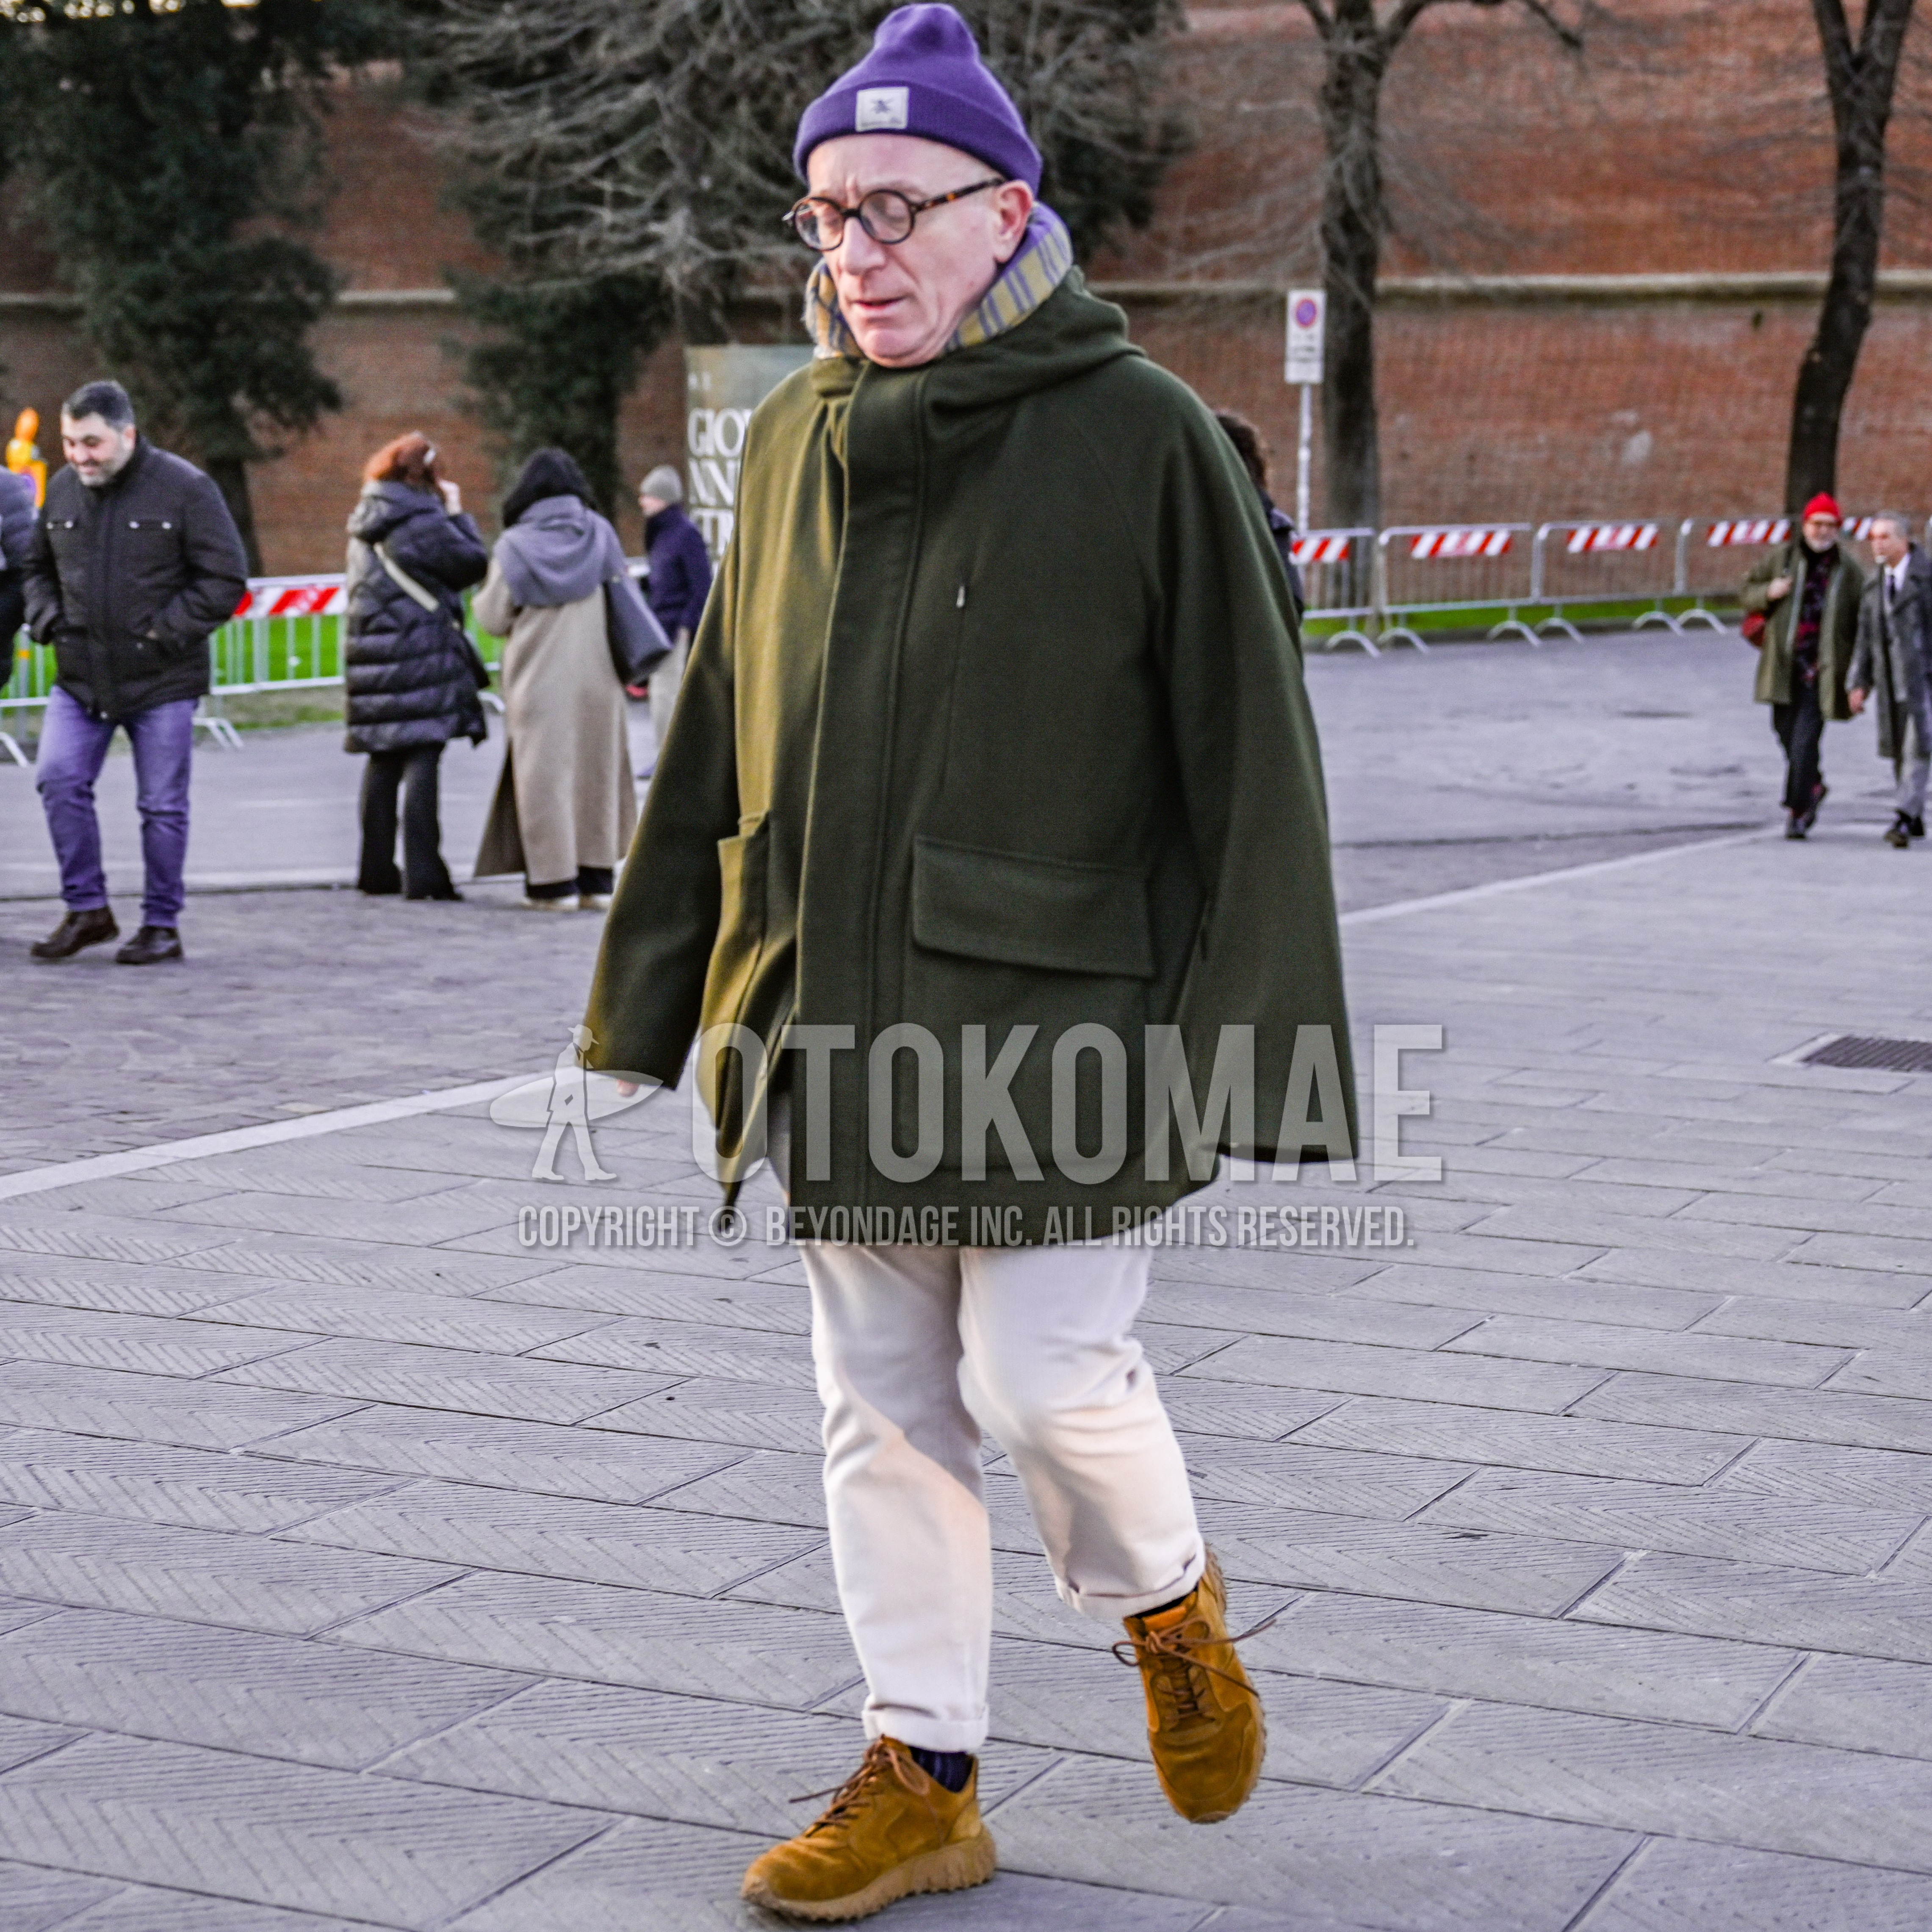 Men's autumn winter outfit with purple one point knit cap, brown tortoiseshell glasses, purple yellow stripes scarf, olive green plain hooded coat, white plain cotton pants, navy stripes socks, brown sneakers.